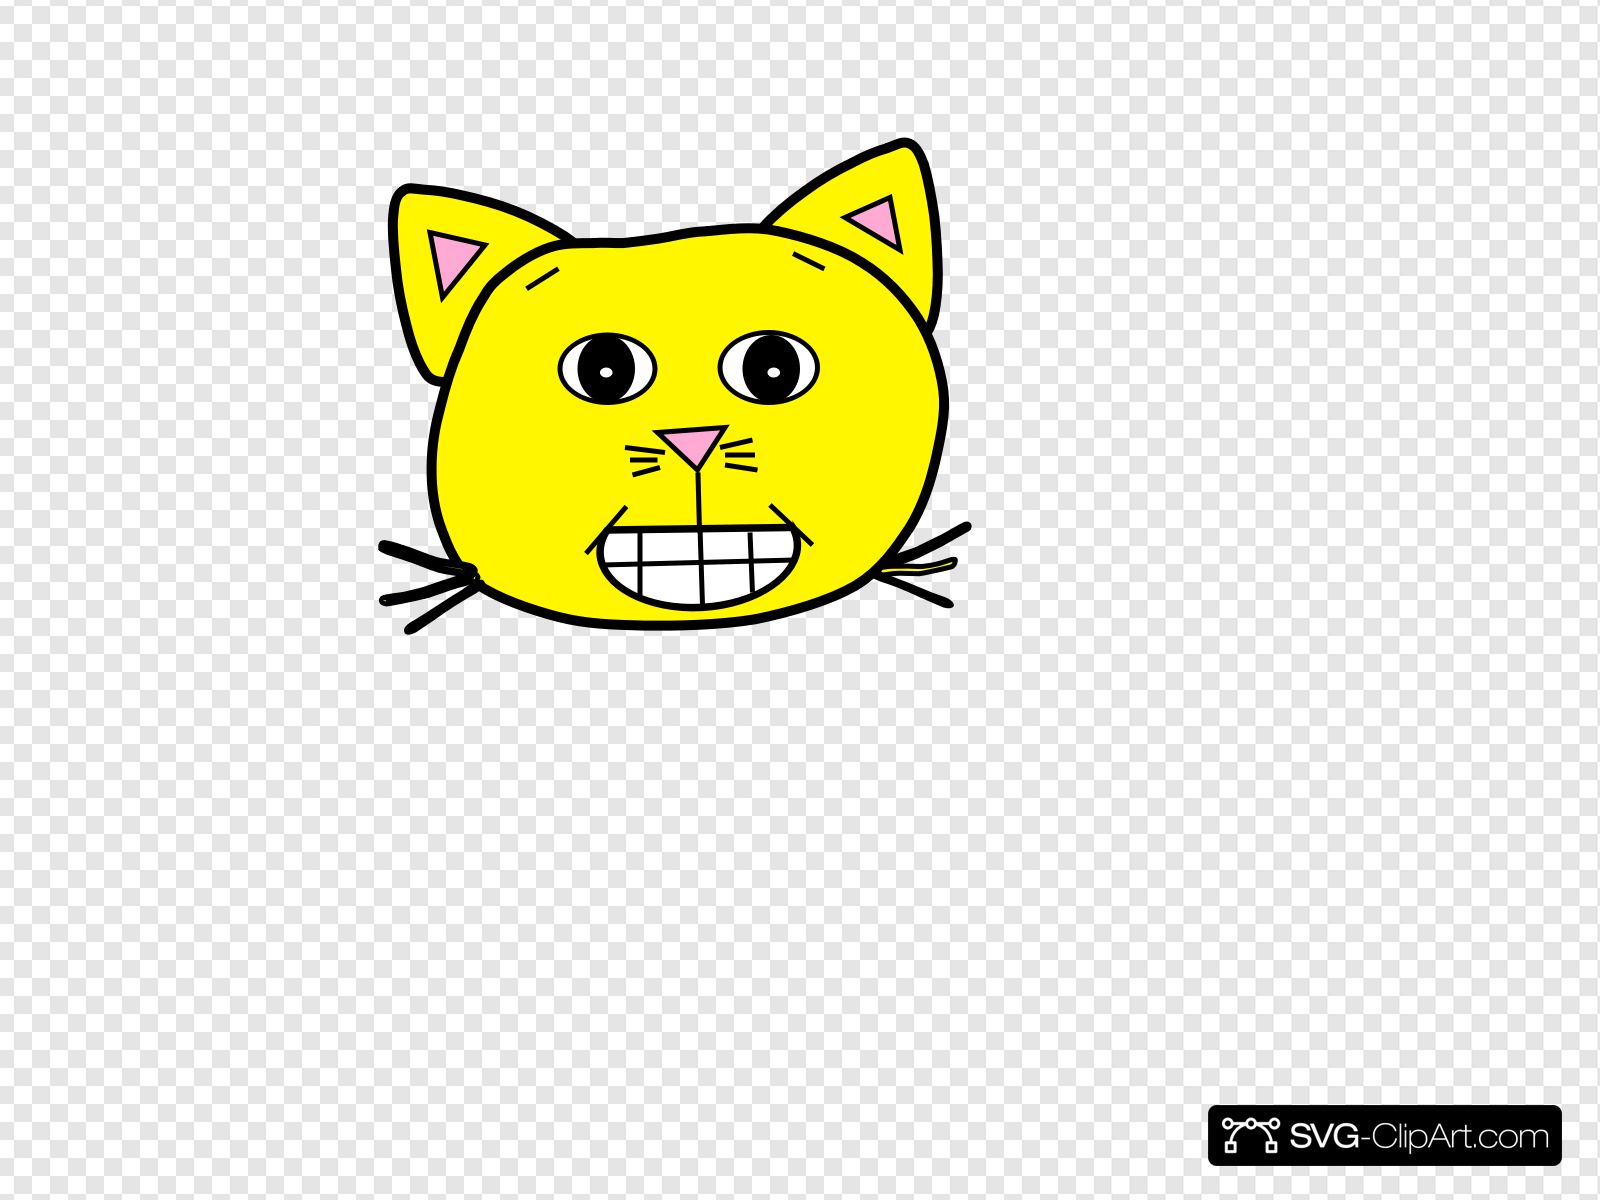 Ecstatic Yellow Clip art, Icon and SVG.